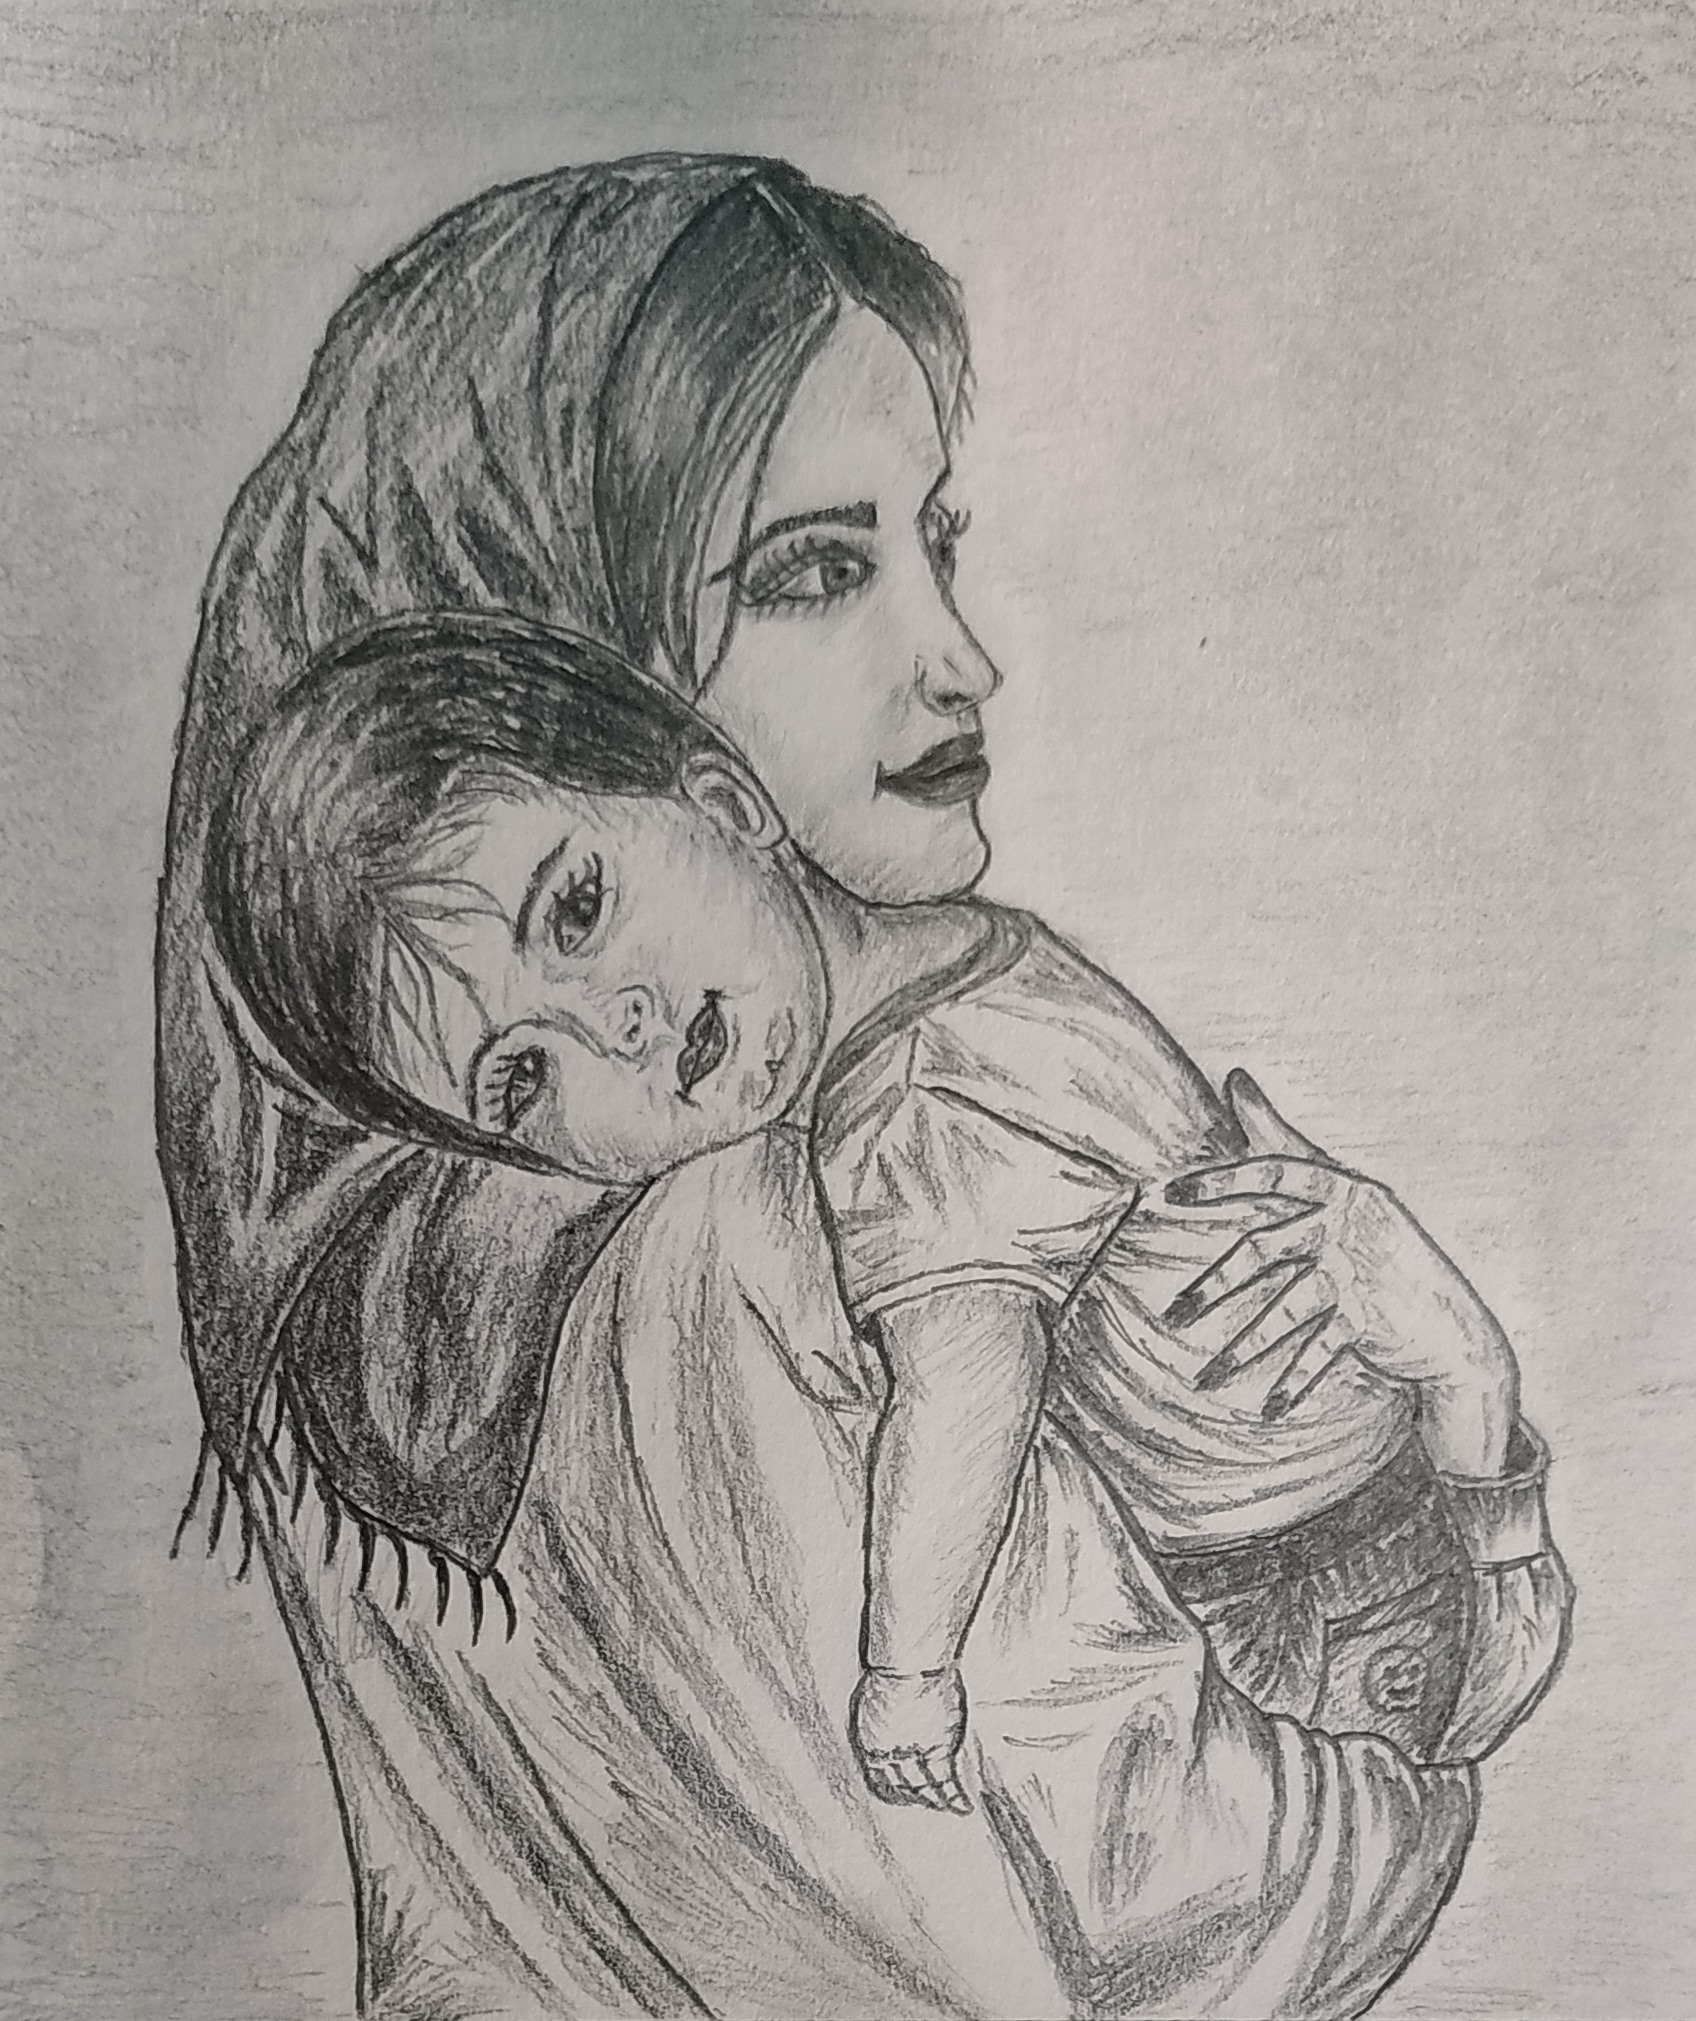 Mother And Child Drawing Pencil Sketch Colorful Realistic Art Images Drawing Skill Pencil sketch, drawing, drawing for beginners, mother and child, pencil sketch of mother and child love and happiness concept of. drawing skill